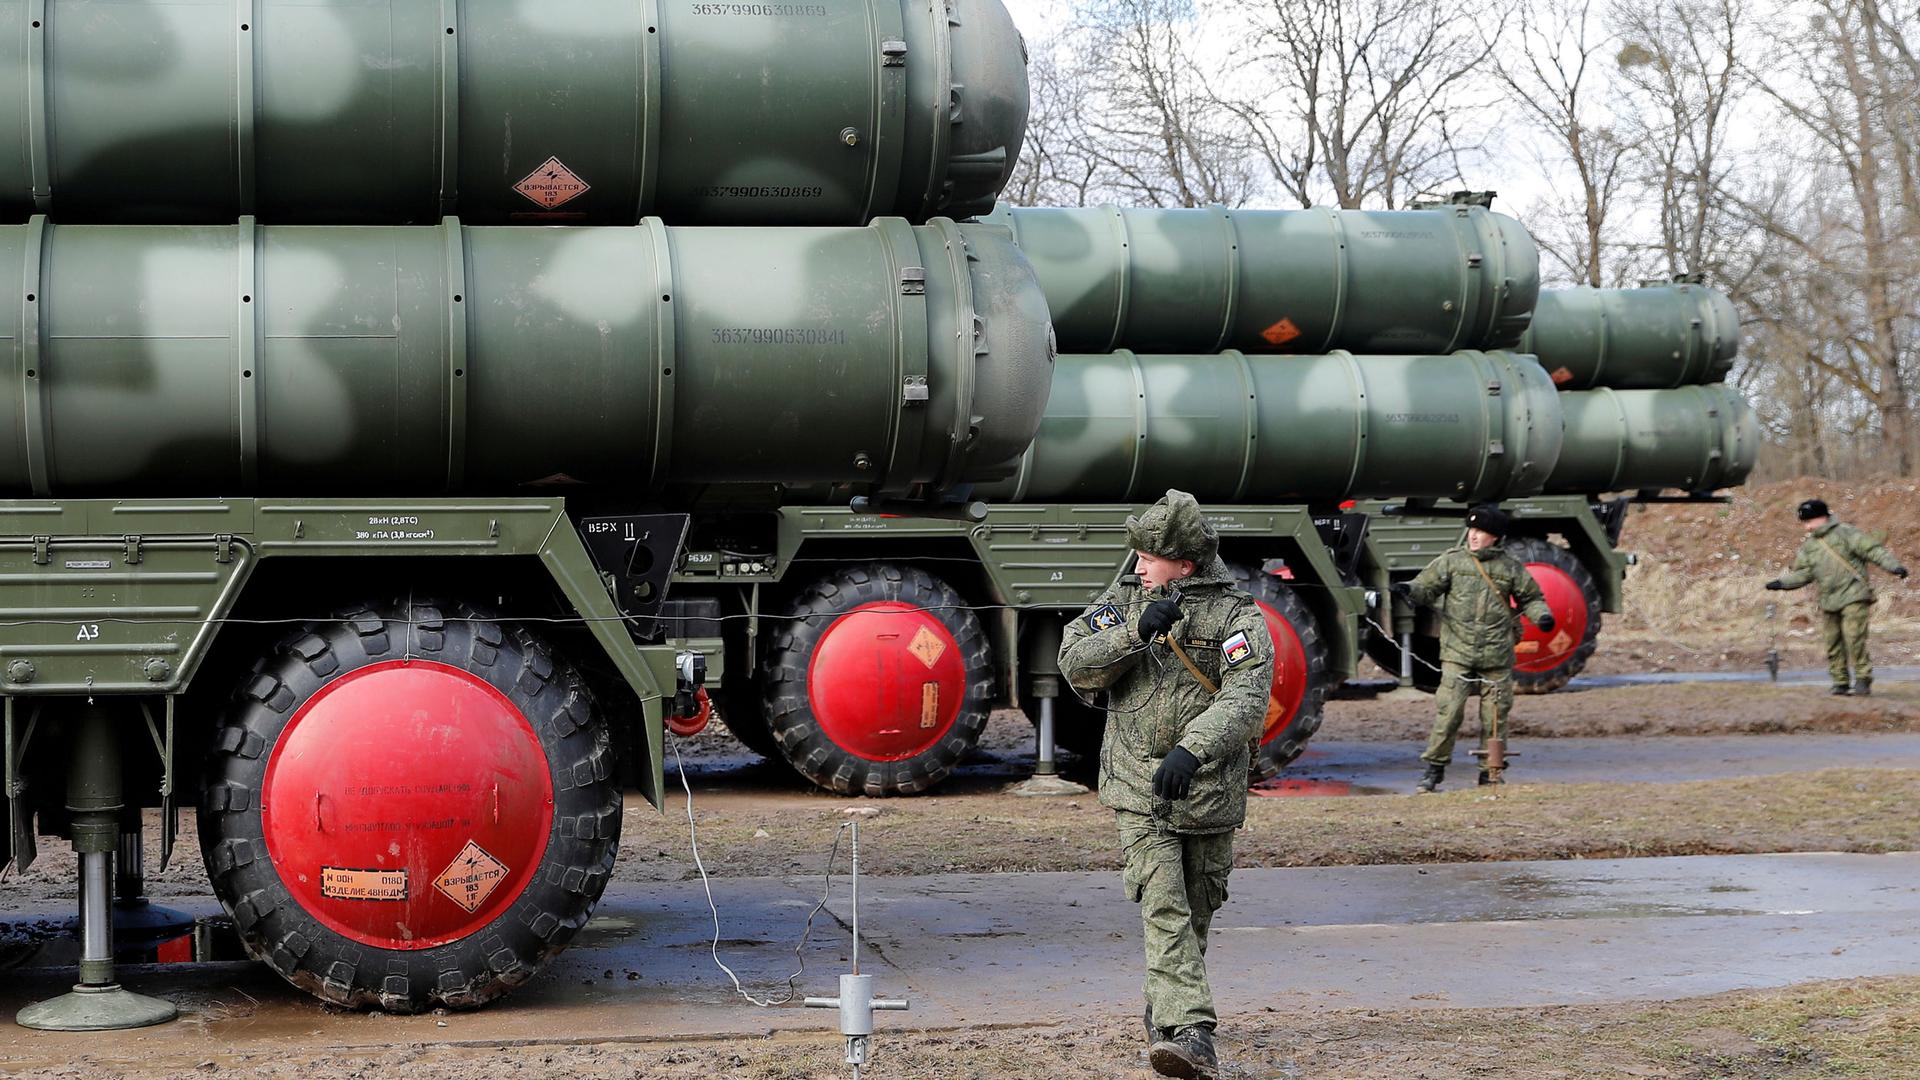 Russian servicemen dressed in fatigues stand next to a large trucks with surface-to-air missile system on top.